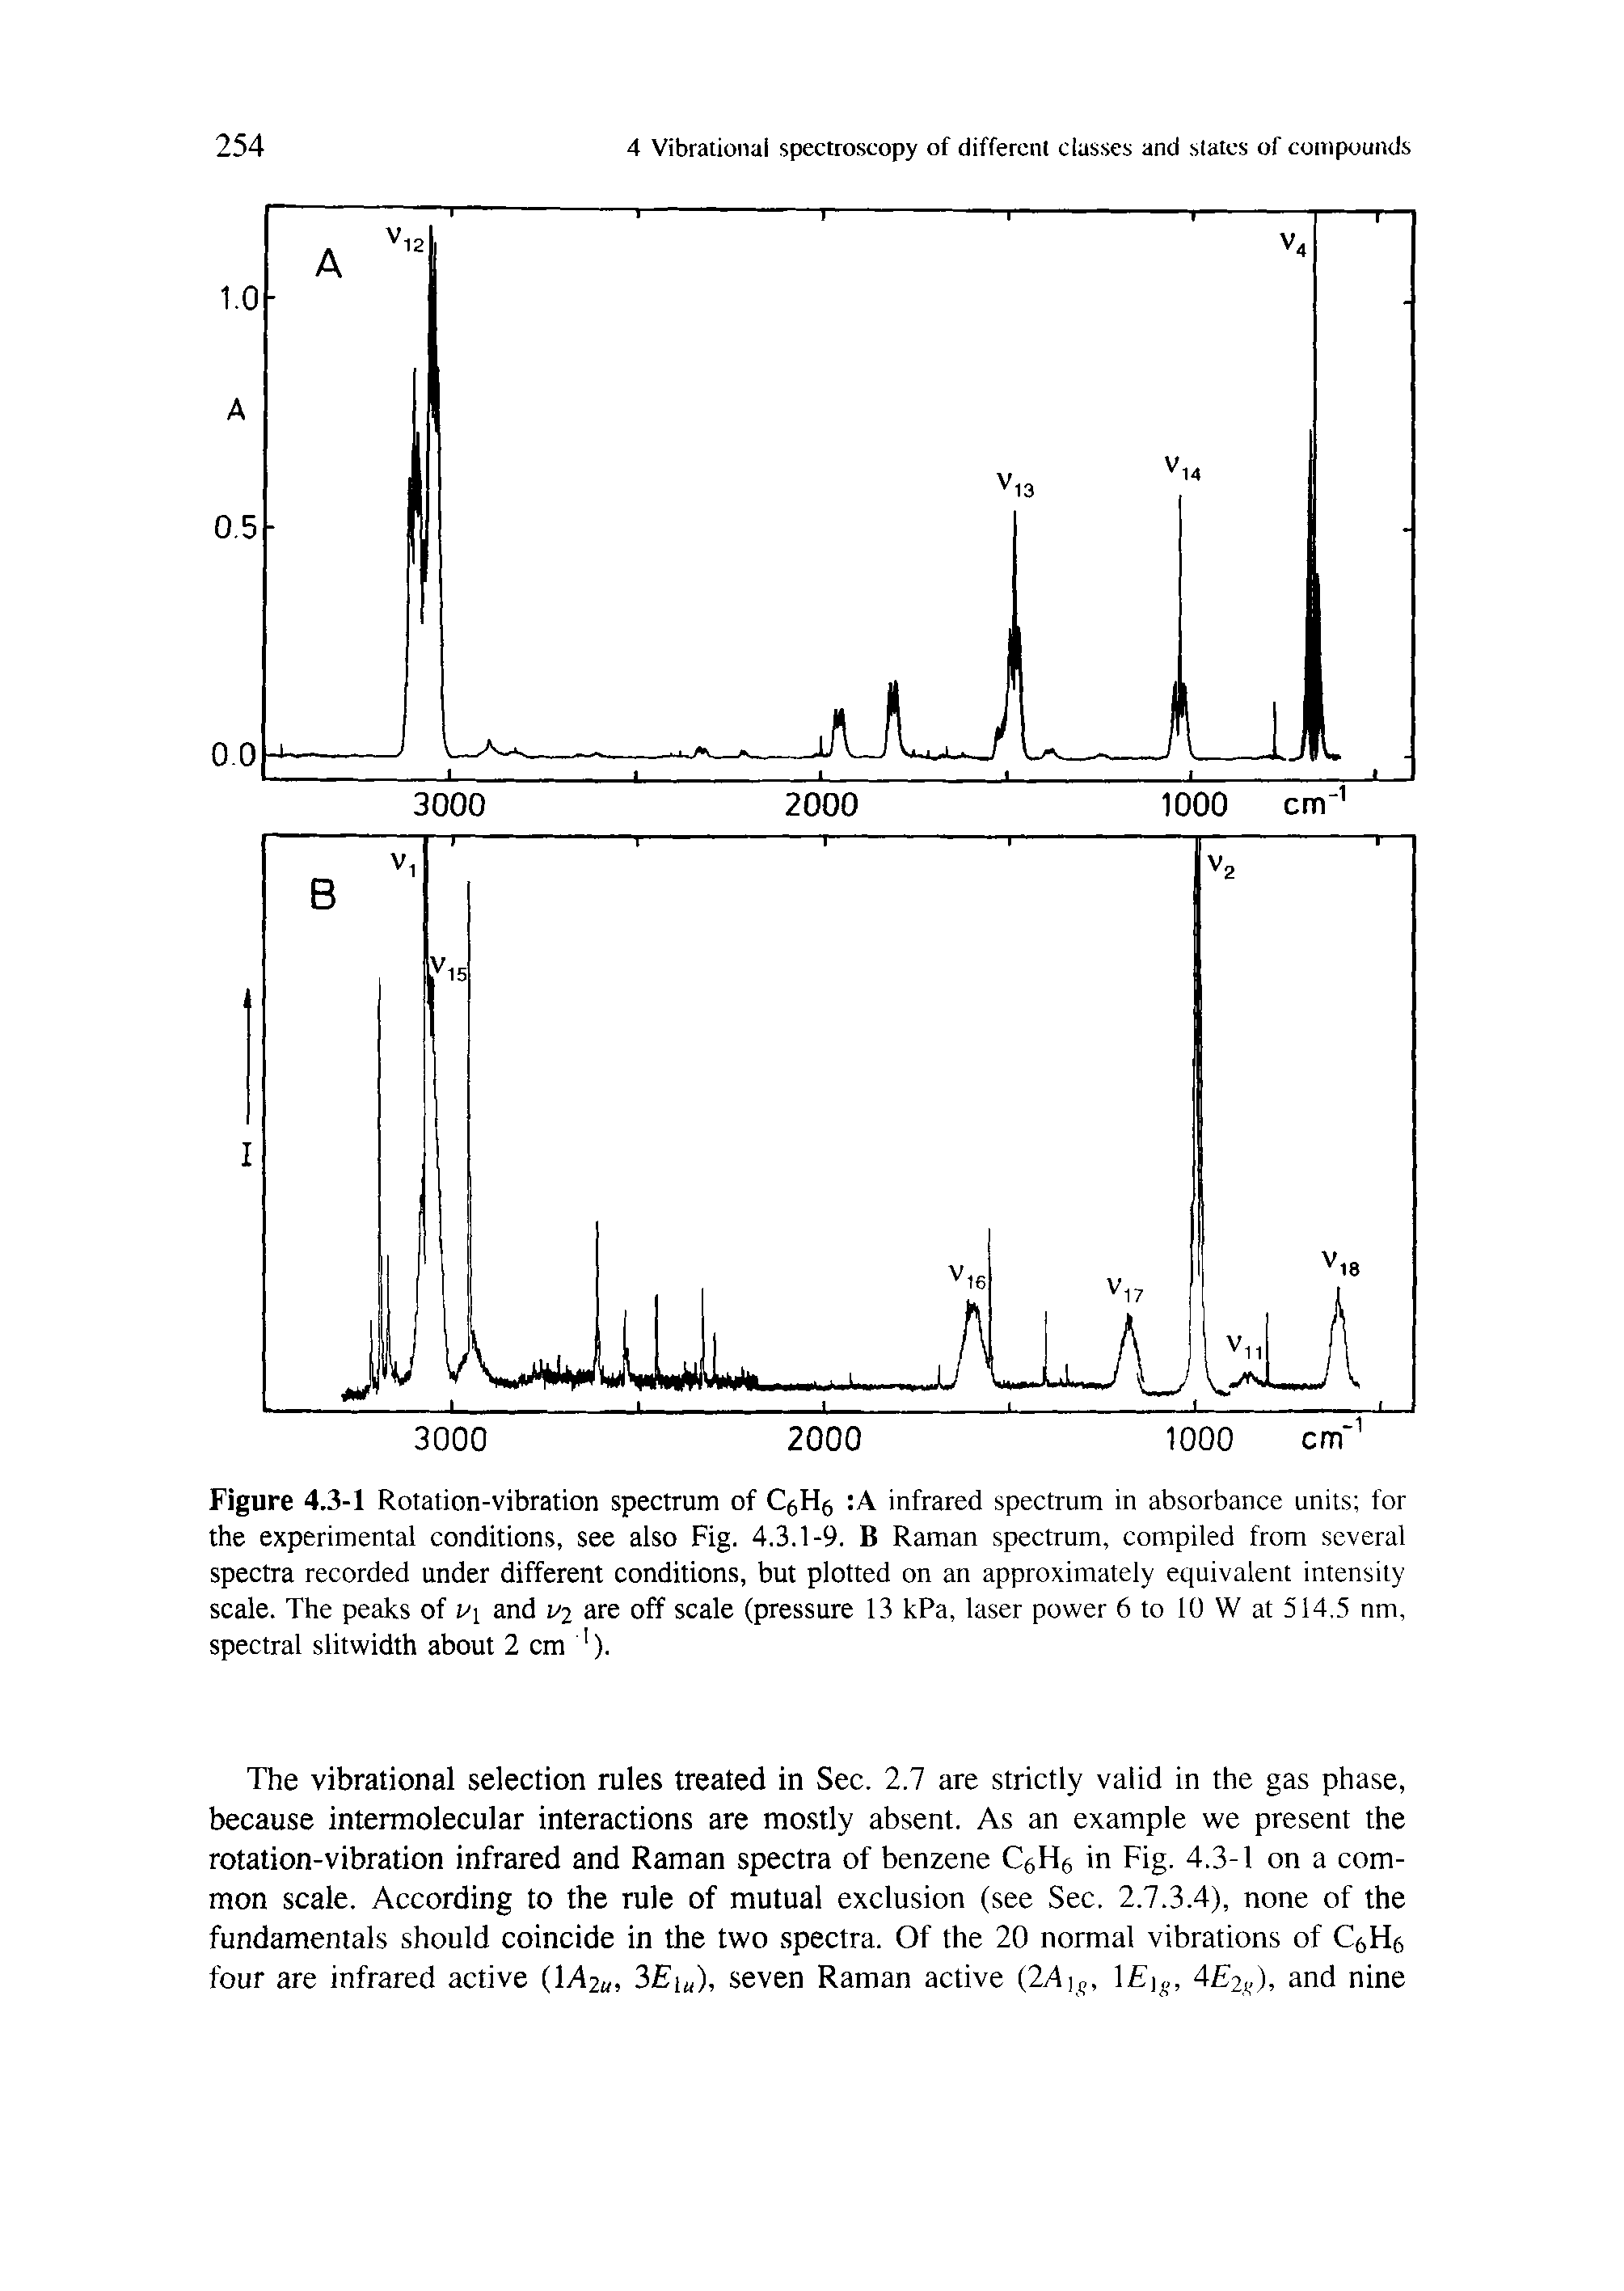 Figure 4.3-1 Rotation-vibration spectrum of A infrared spectrum in absorbance units for the experimental conditions, see also Fig. 4.3.1-9. B Raman spectrum, compiled from several spectra recorded under different conditions, but plotted on an approximately equivalent intensity scale. The peaks of r l and vj are off scale (pressure 13 kPa, laser power 6 to 10 W at 514.5 nm, spectral slitwidth about 2 cm ).